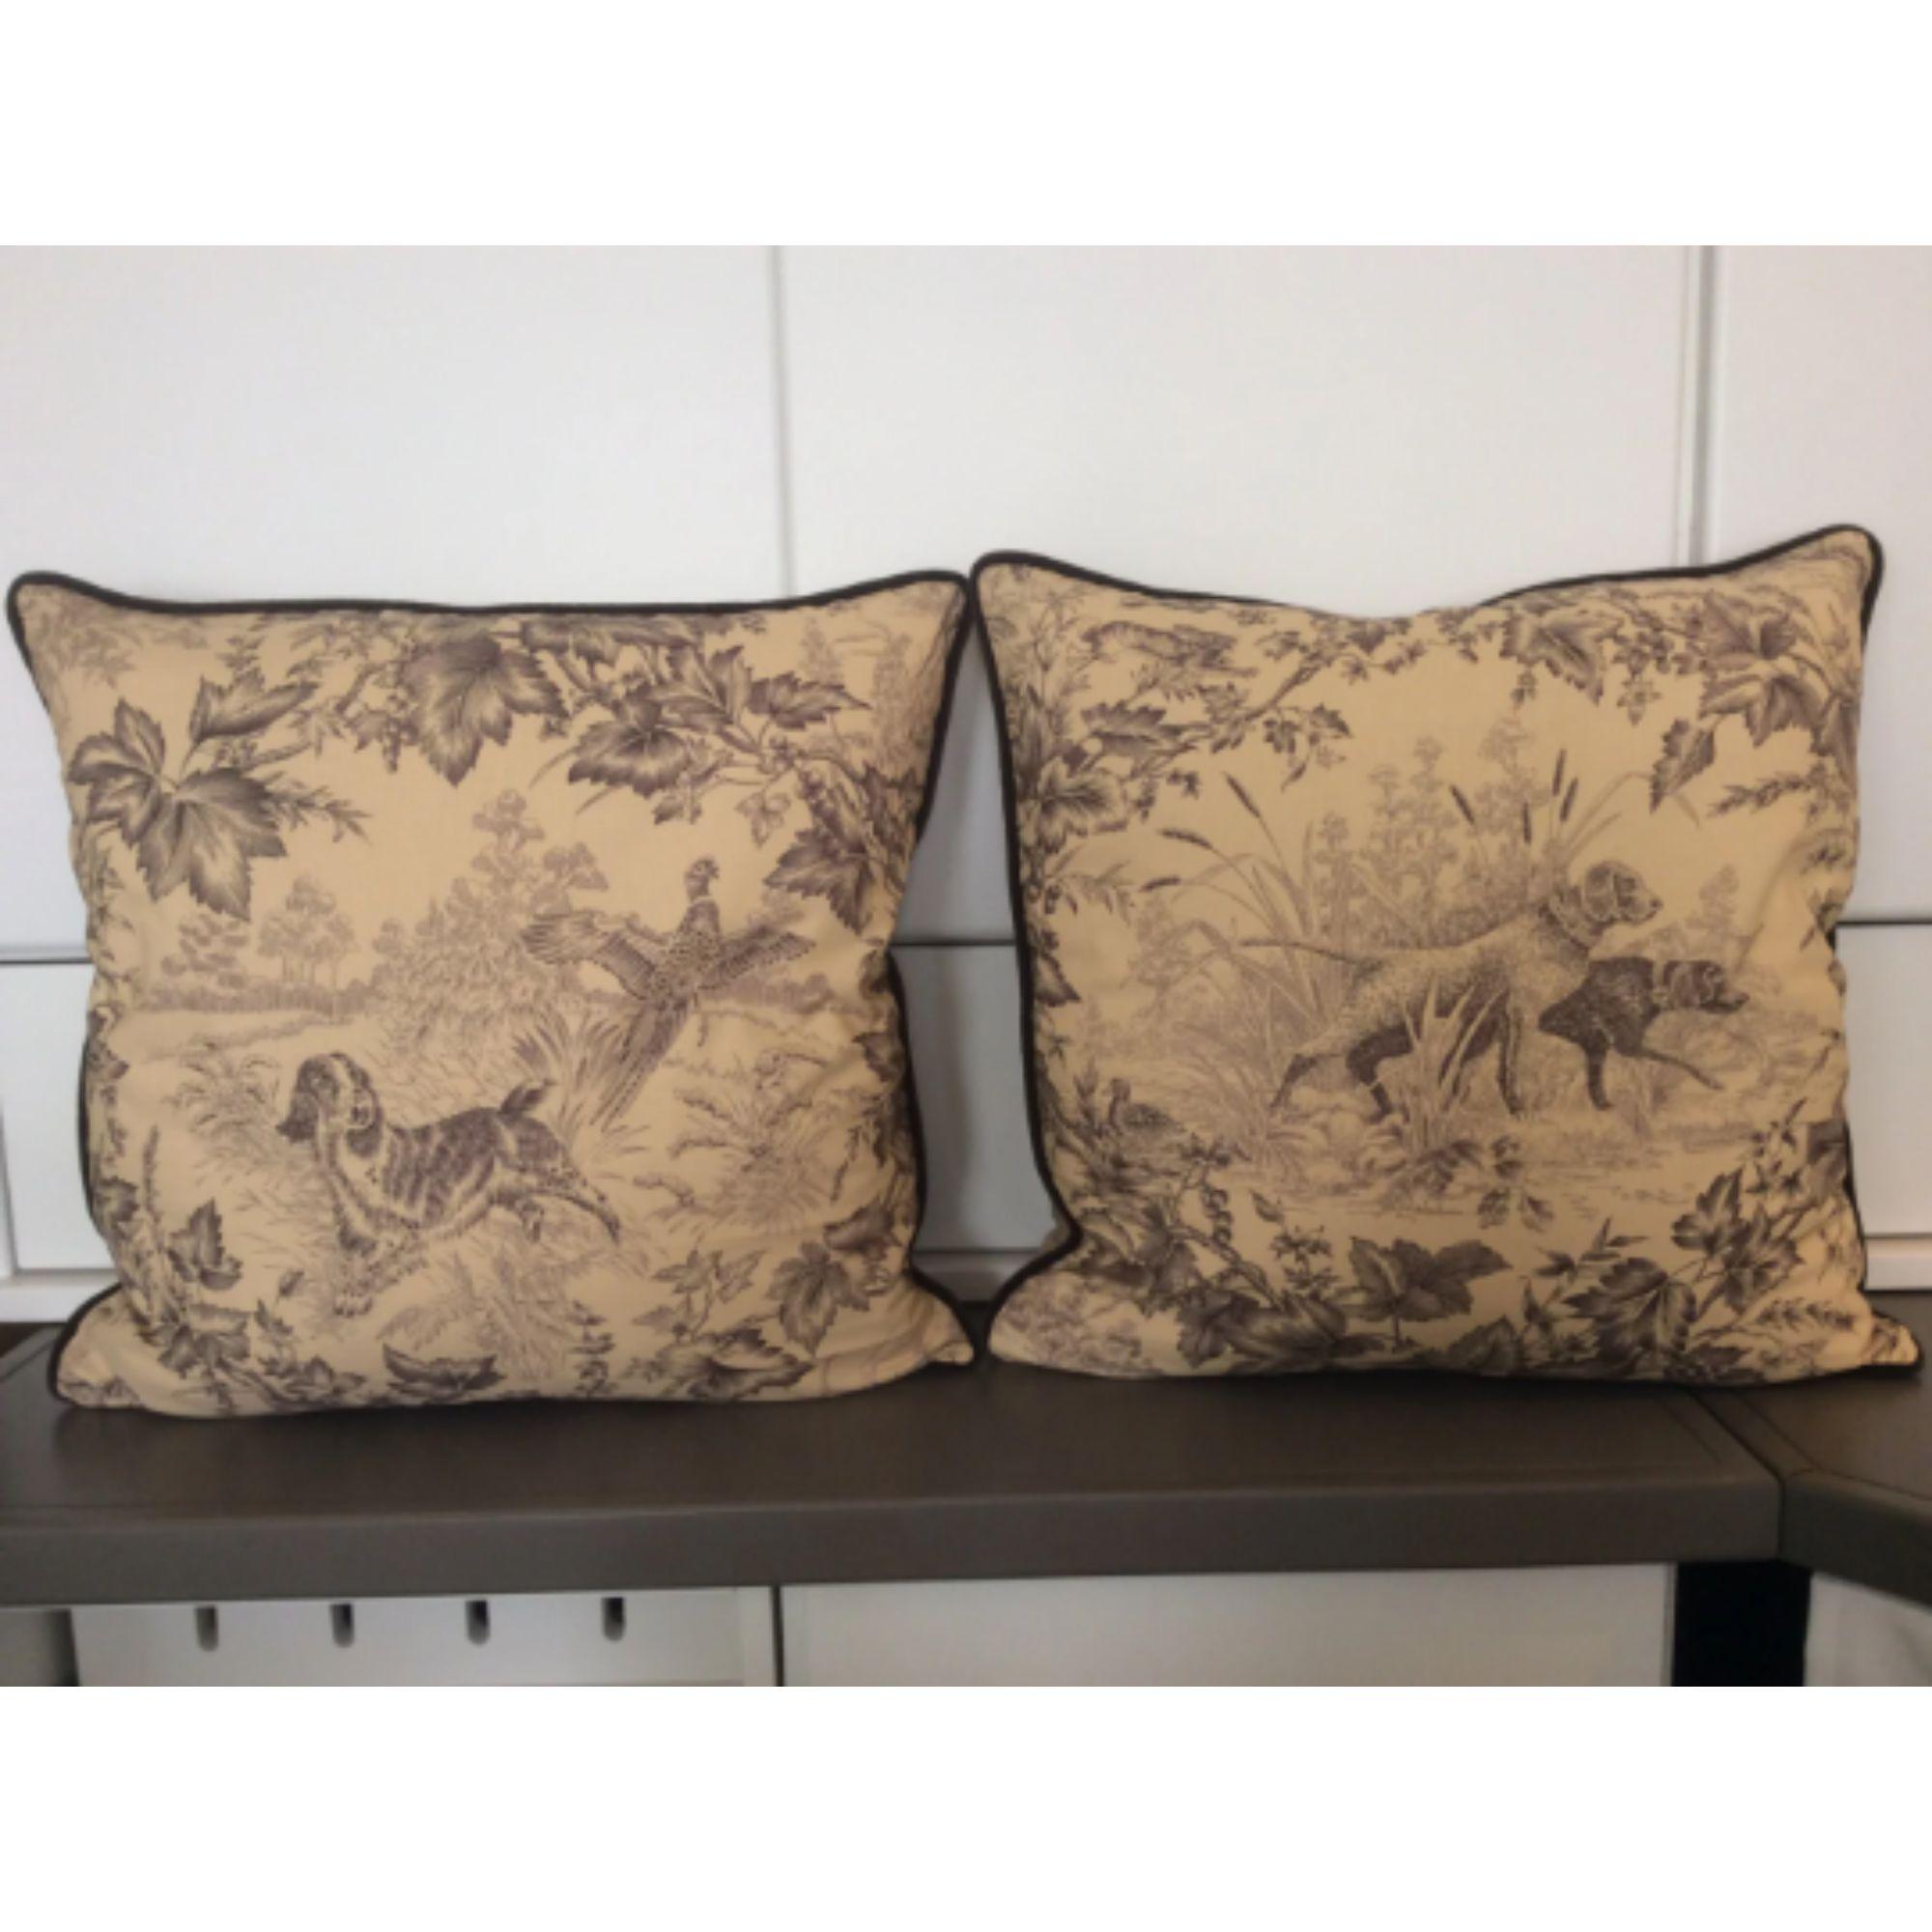 American Brunschwig & Fils “On Point”-Hunting Toile in Tobacco and Cream-Pillows - a Pair For Sale